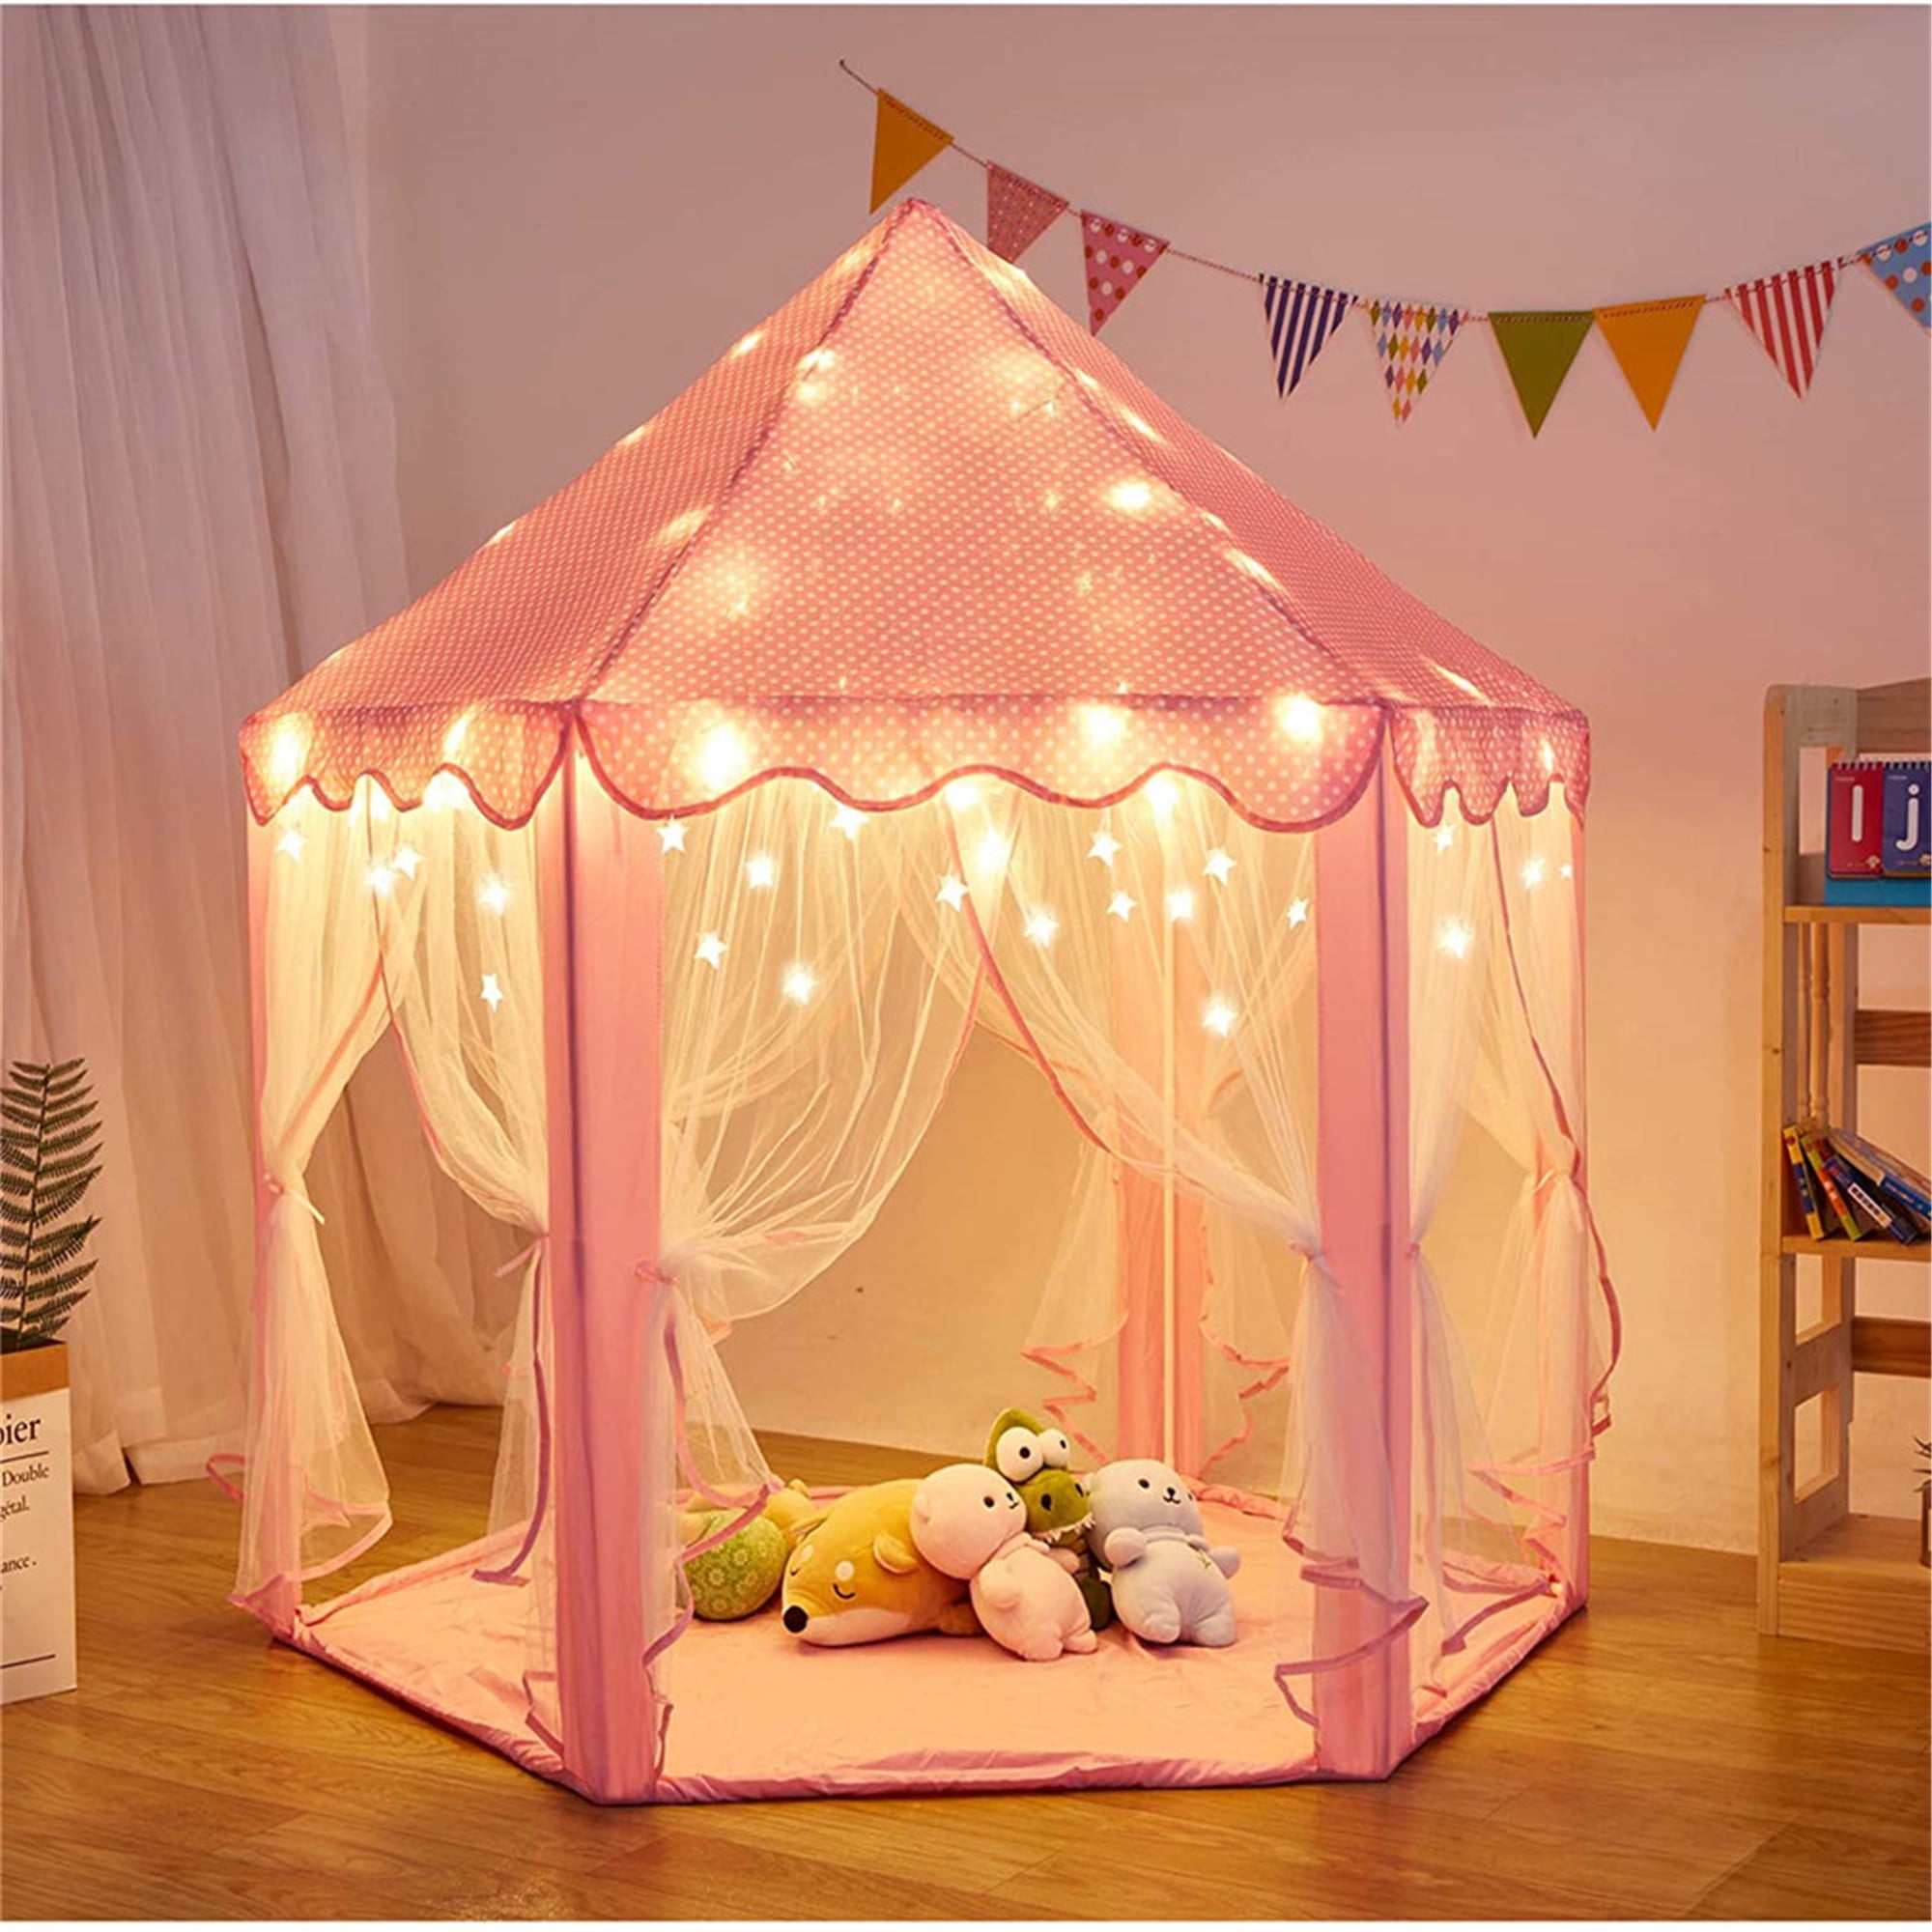 Playhouse Tent Kids Baby Large Indoor Outdoor Sleeping Game Play House Pop Up 